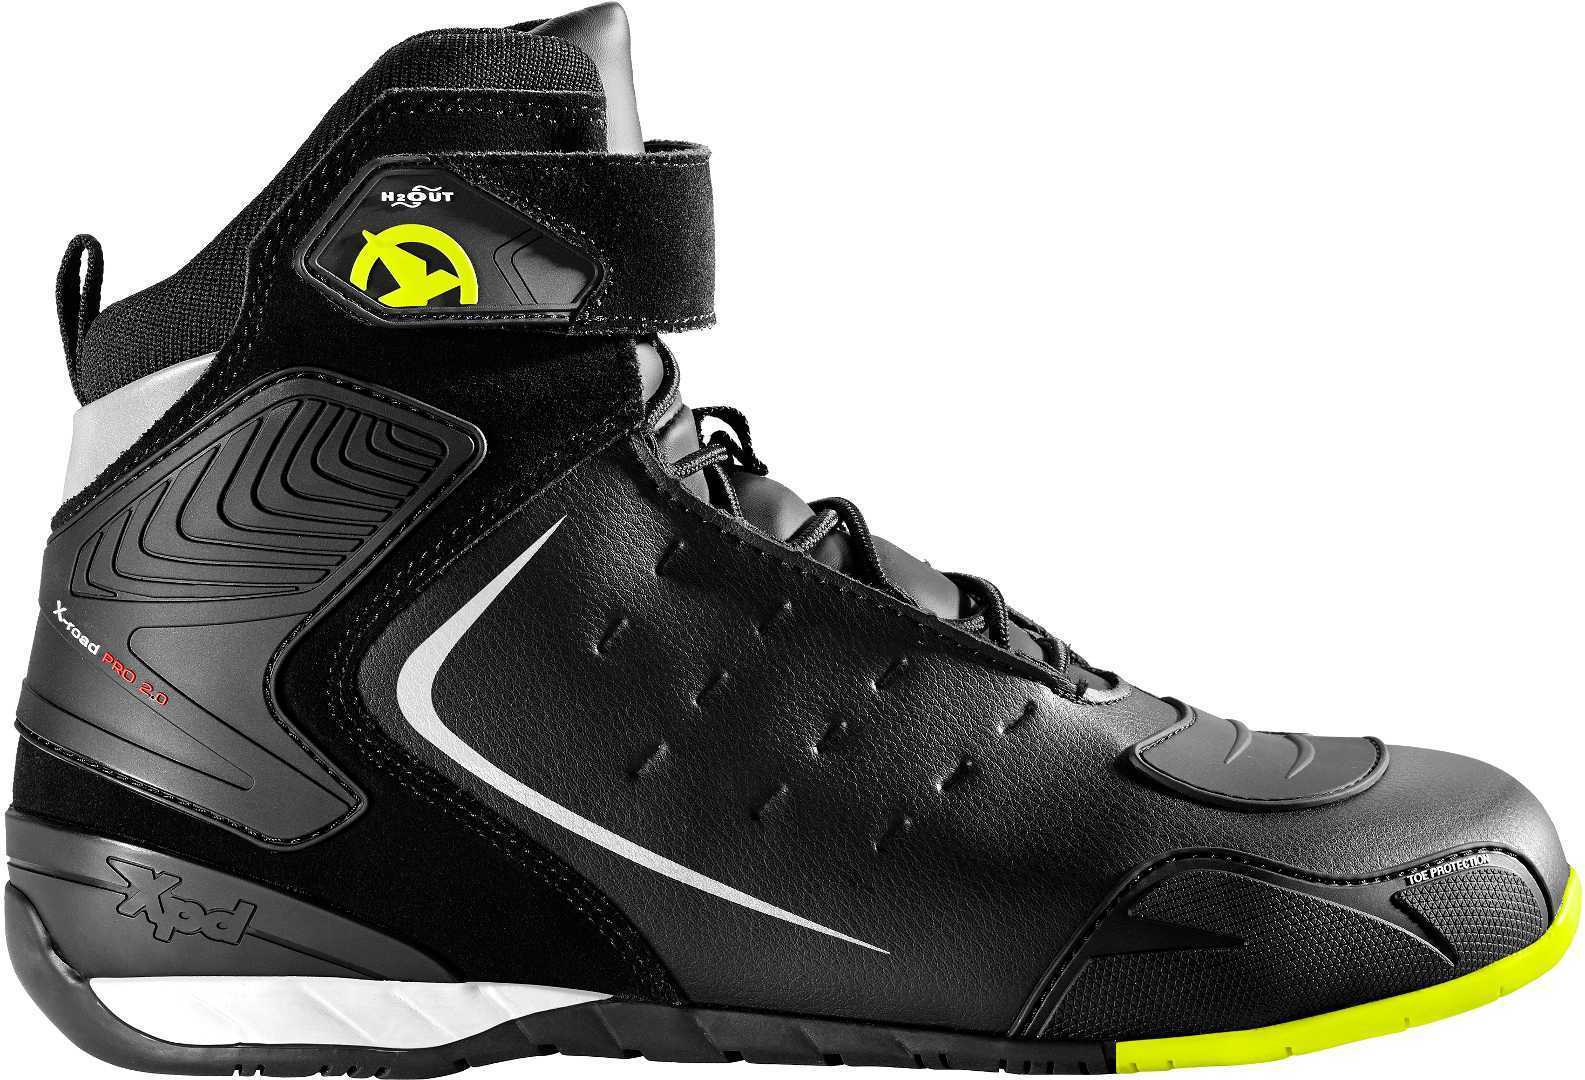 Image of EU XPD X-Road H2Out Jaune Fluo Chaussures Taille 39